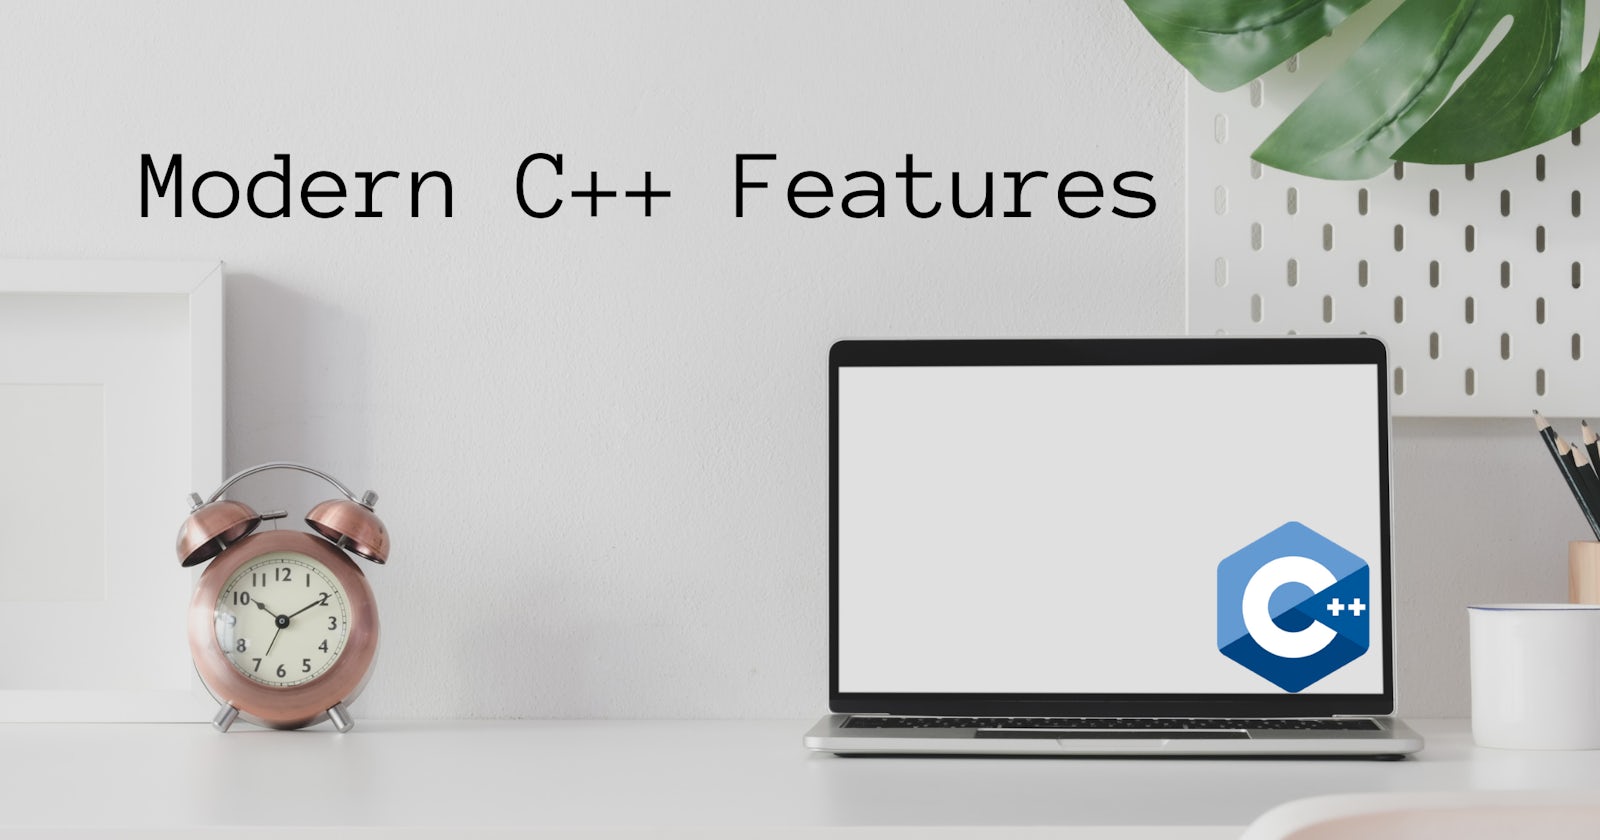 Modern C++ Features